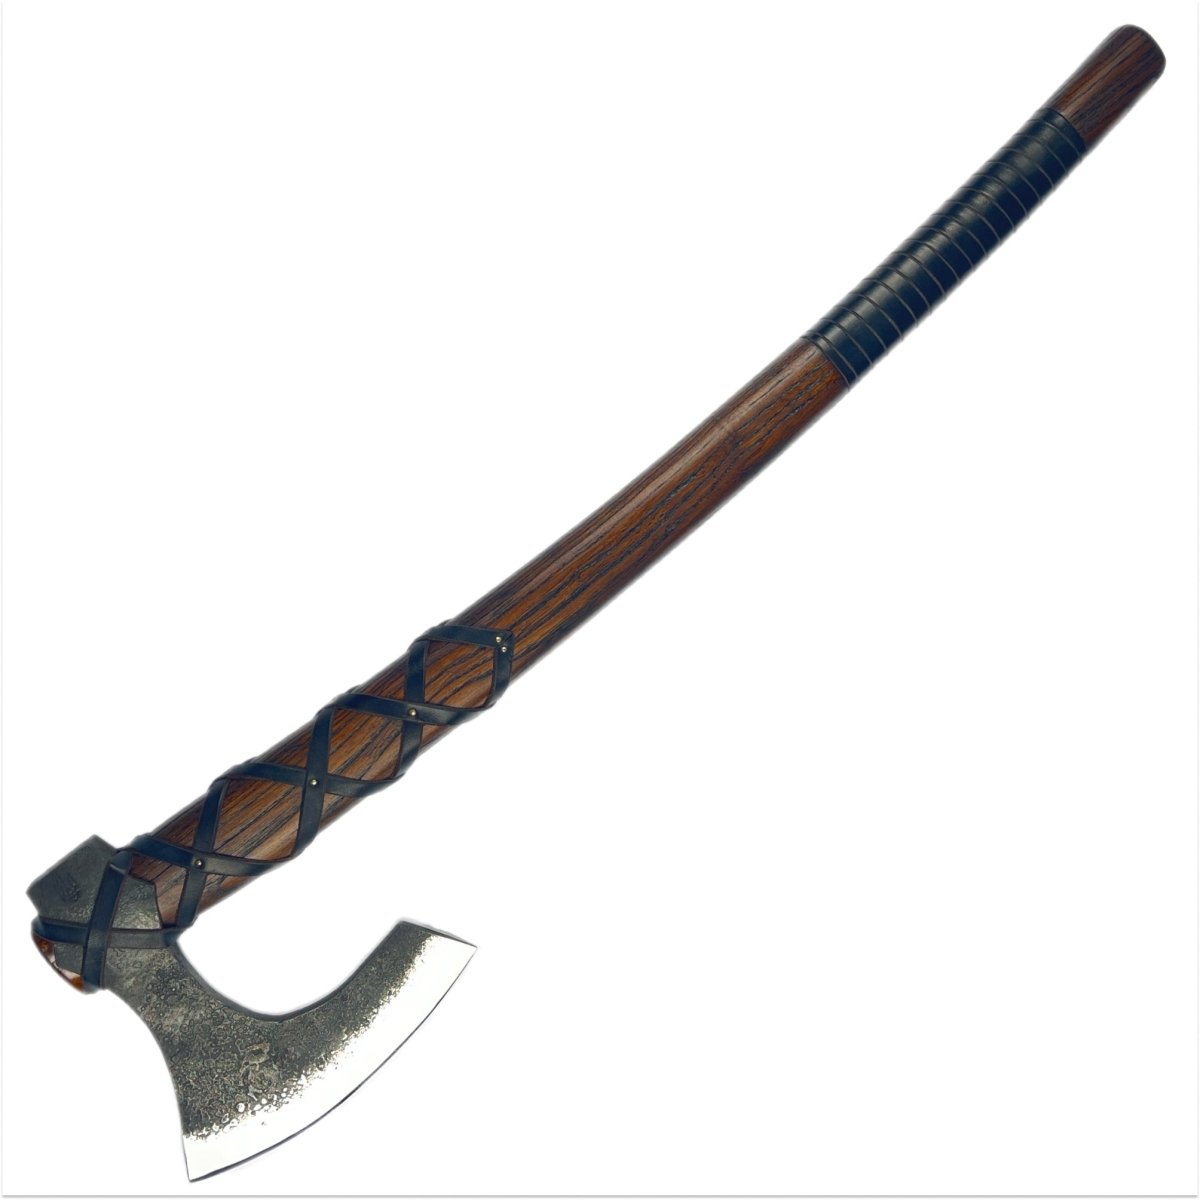 Viking long axe "Ragnar Lodbrok" with carving handle and leather wrap(Functional version) from AncientSmithy